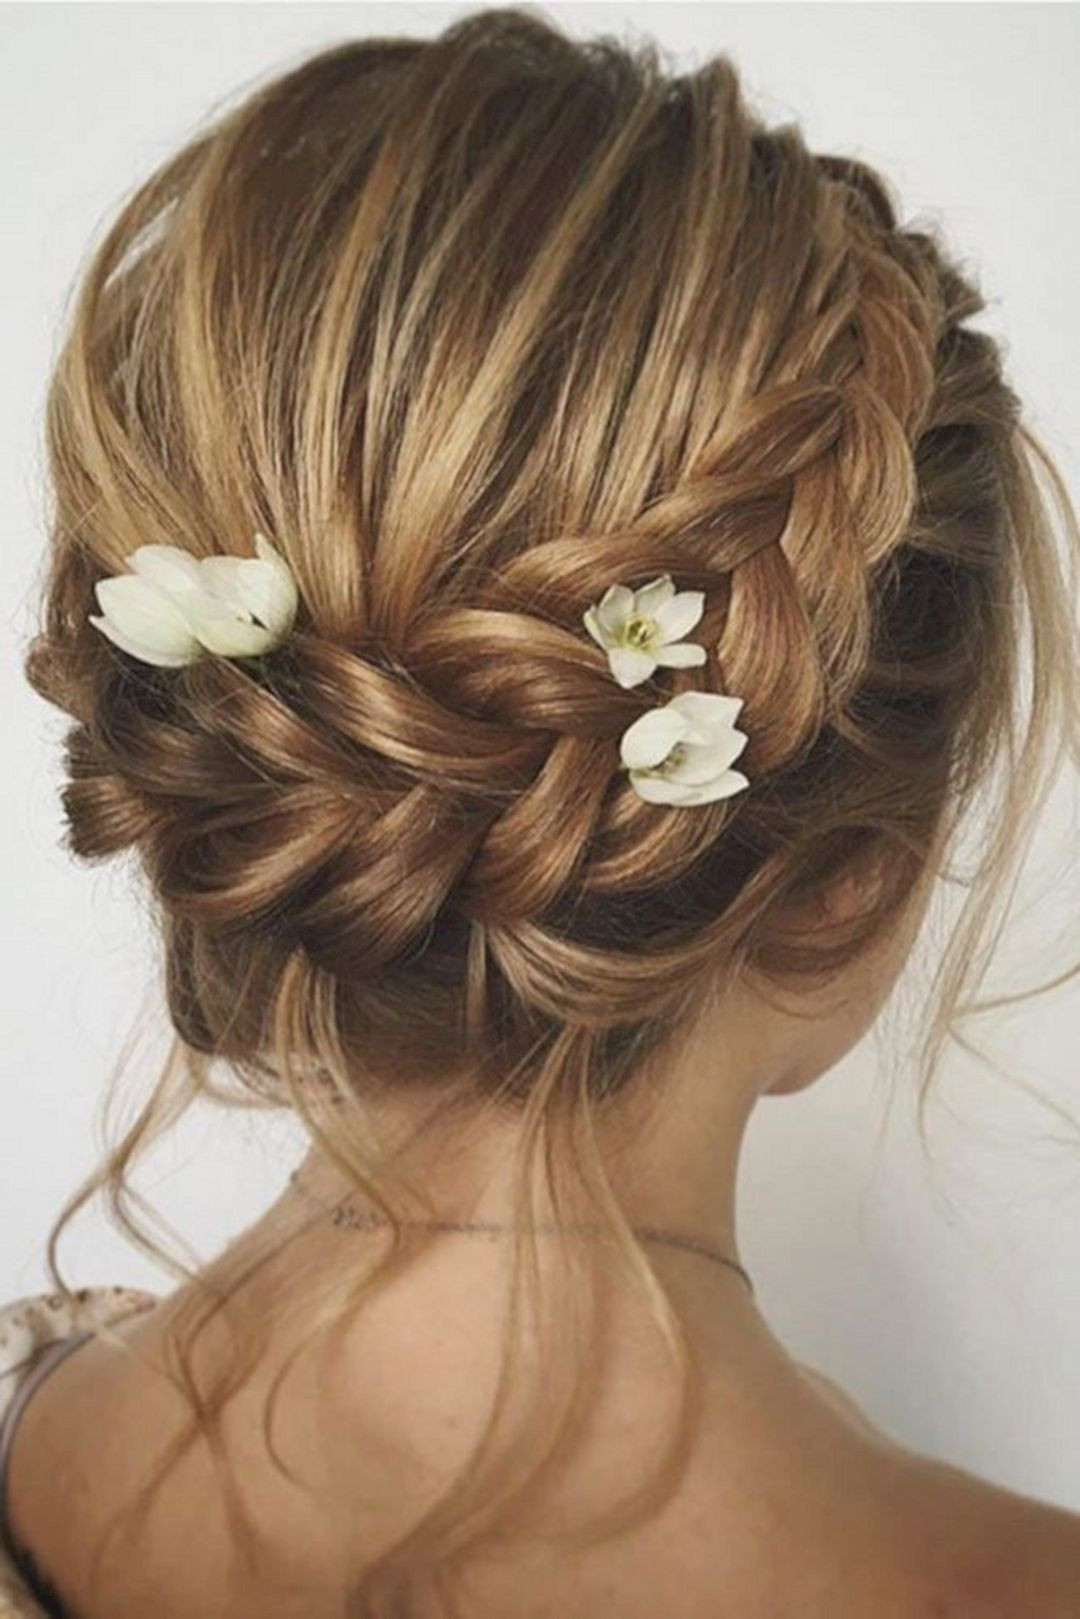 Bridesmaids Hairstyle
 Wedding Bridesmaid Hairstyles for Short Hairs – OOSILE